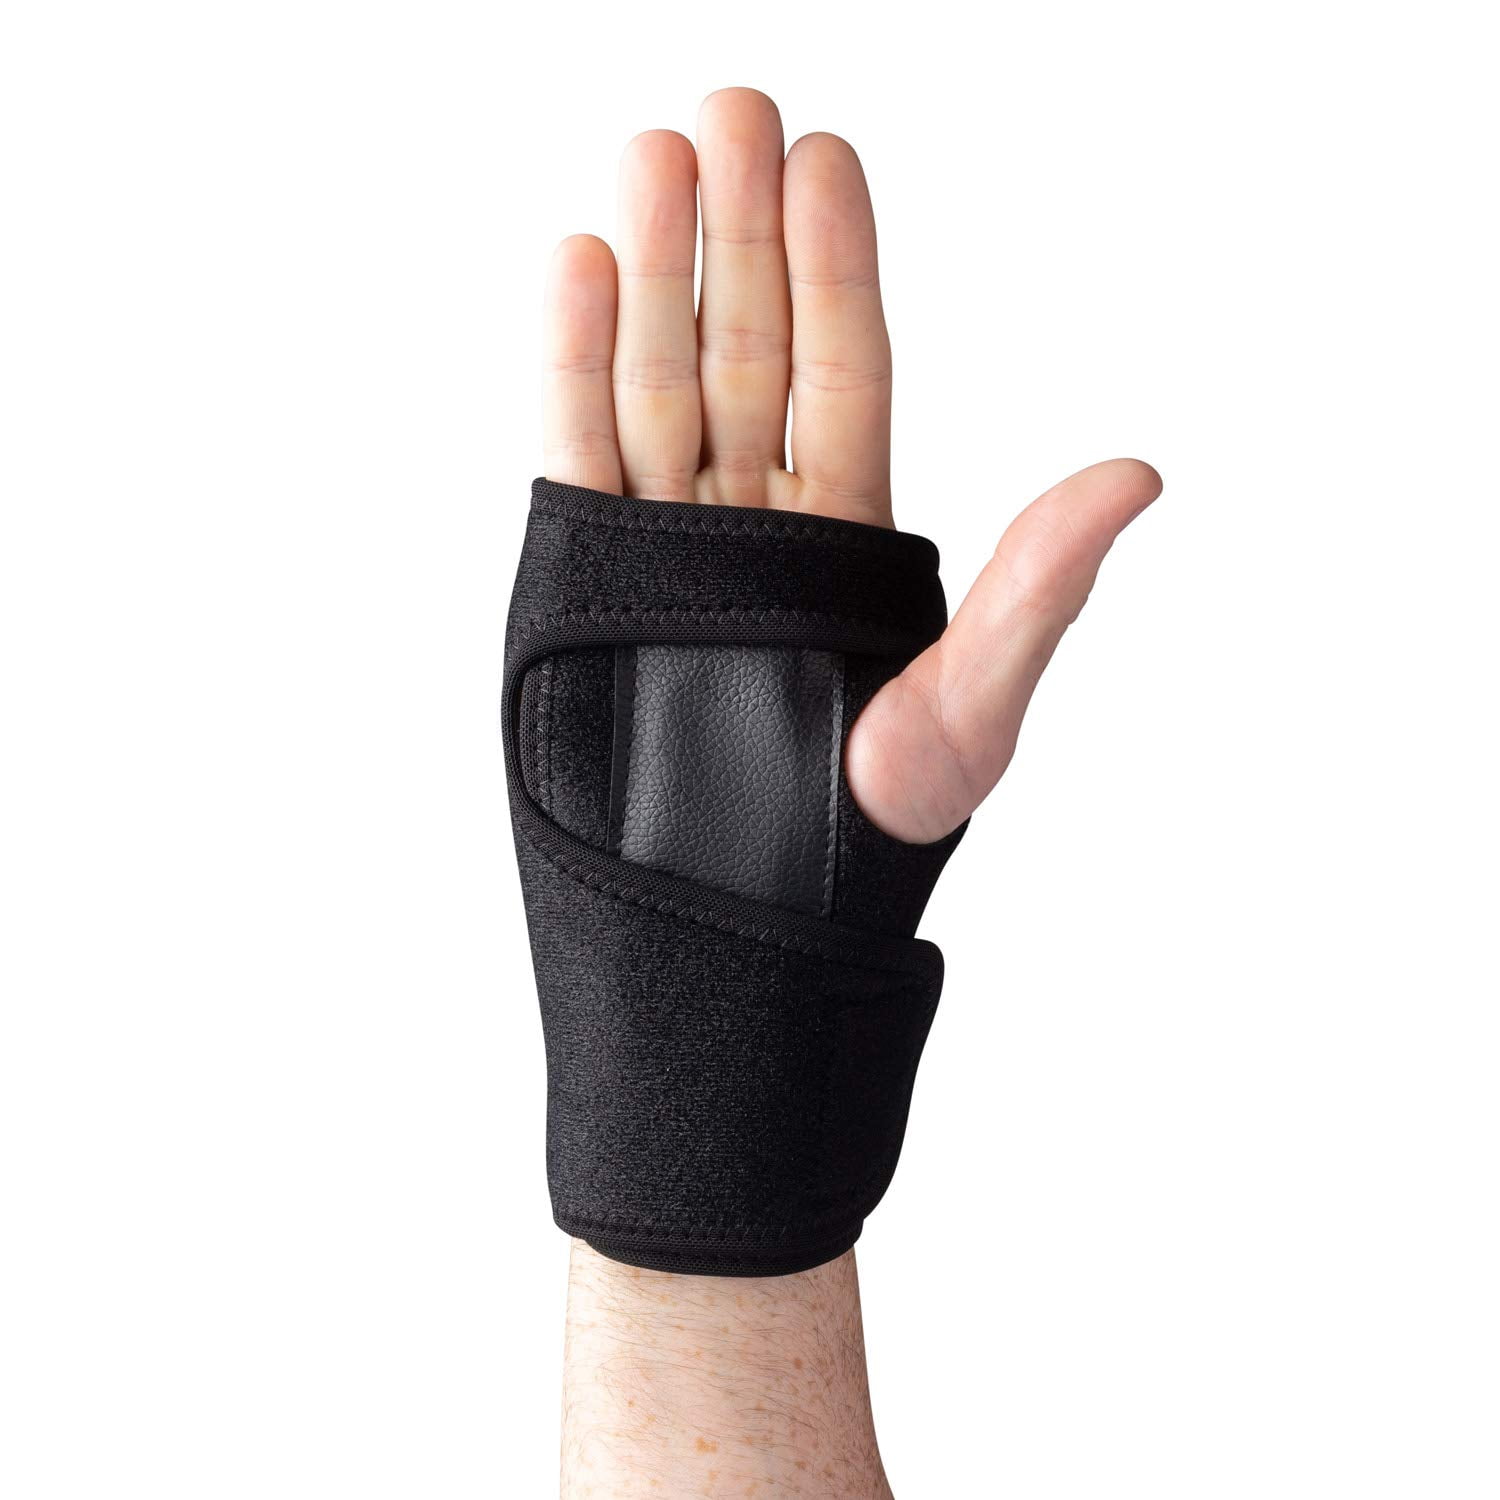 Wrist Support Brace with Removable Splint Hand Wrap Relieve Carpal Tunnel Arthritis Tendonitis Sprains with Cushioned Pad for Women Men Right/SM JL 